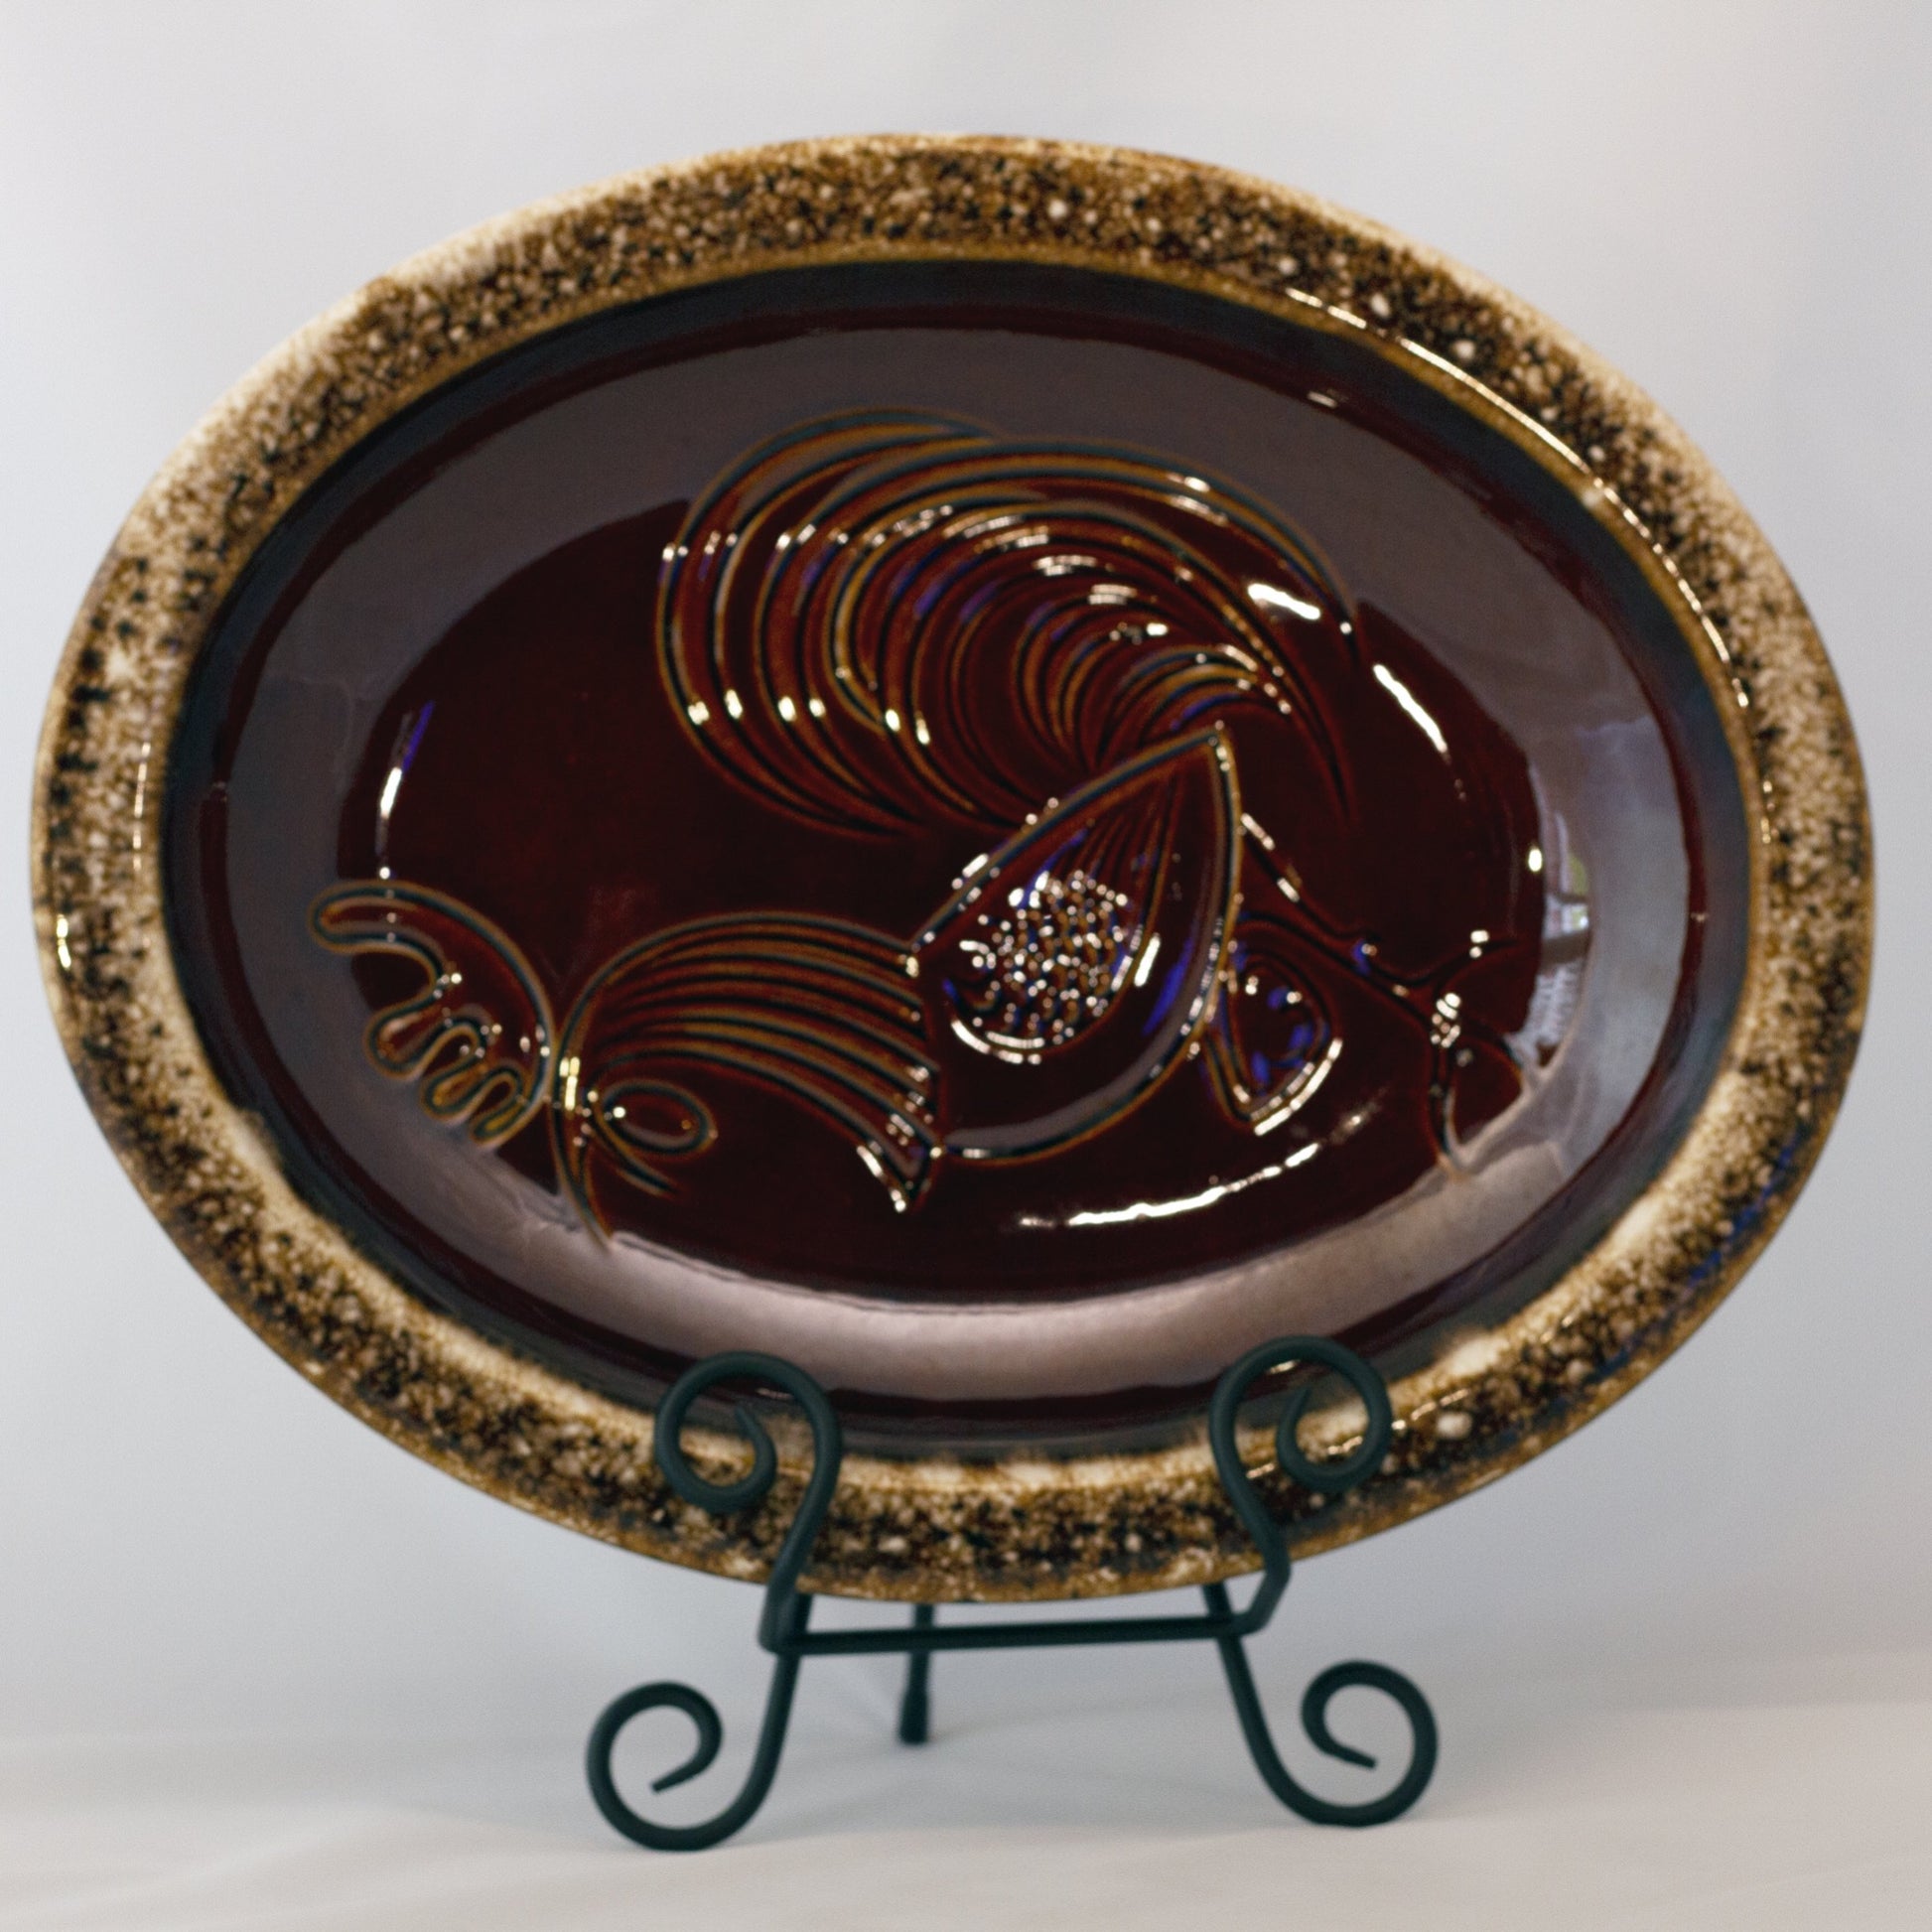 CHICKEN SERVER WITH COVER Hull House 'n Garden Mirror Brown "Drip" Circa Late 1960s to 1986